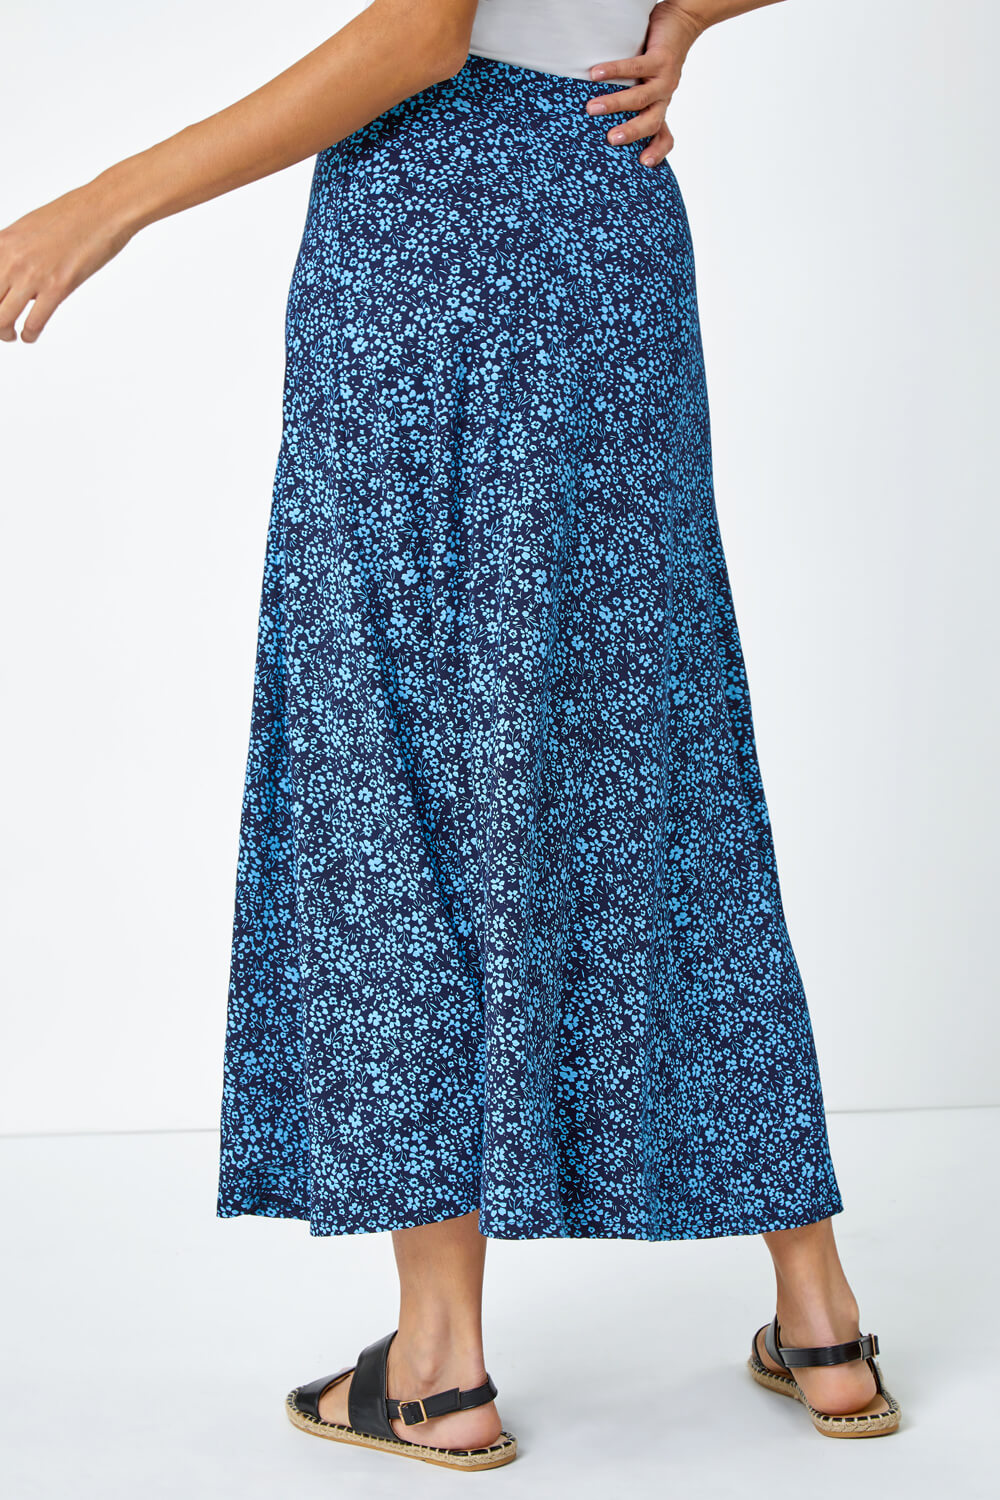 Blue Ditsy Floral Stretch Midi Skirt, Image 3 of 5